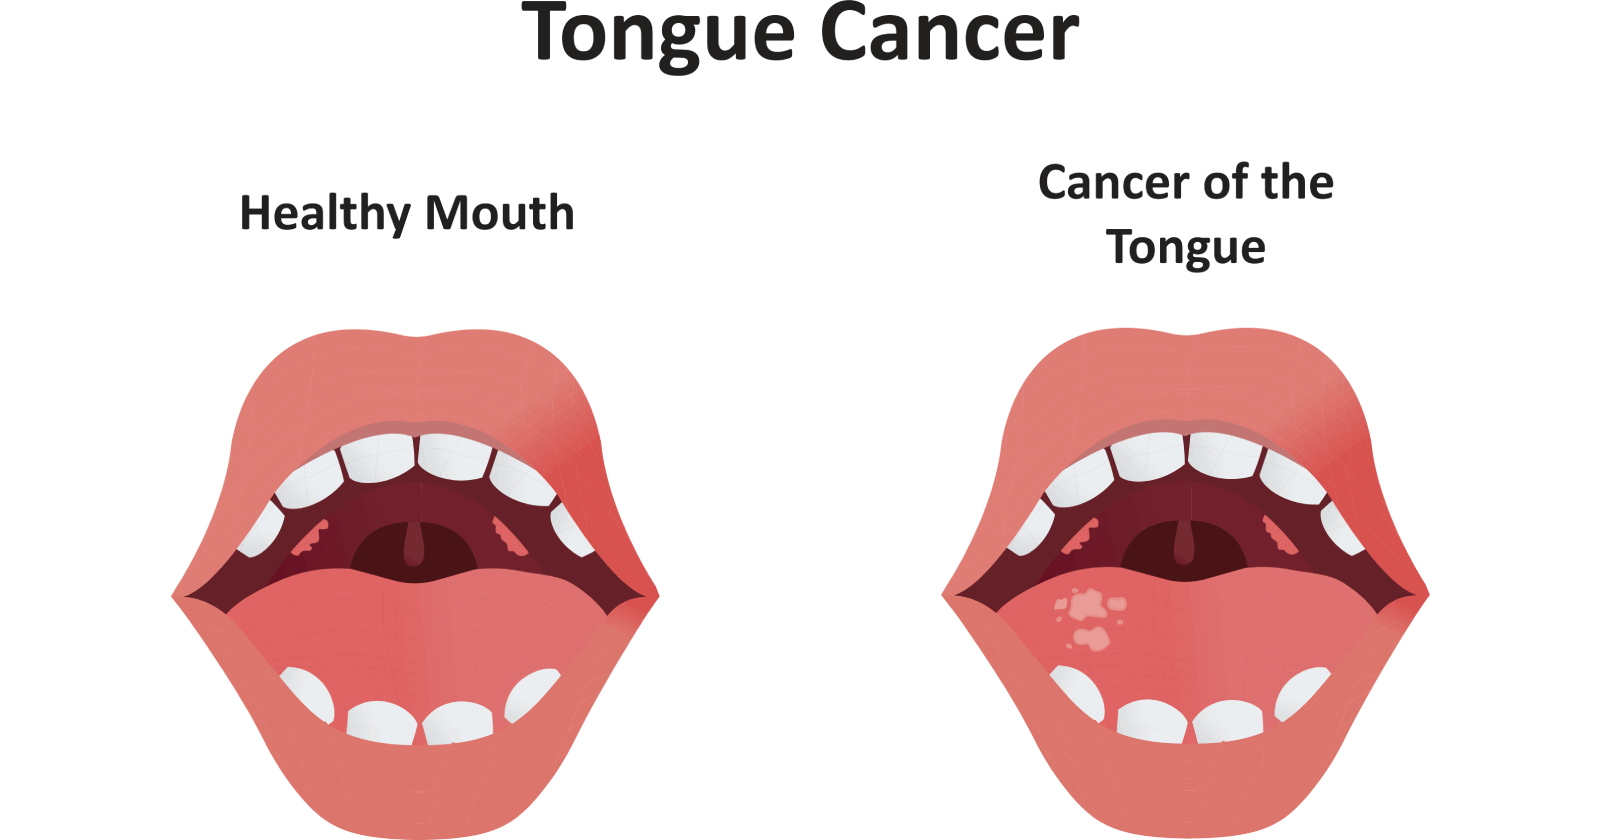 Tongue Cancer: Symptoms, Stages, Causes, Prevention and Treatment